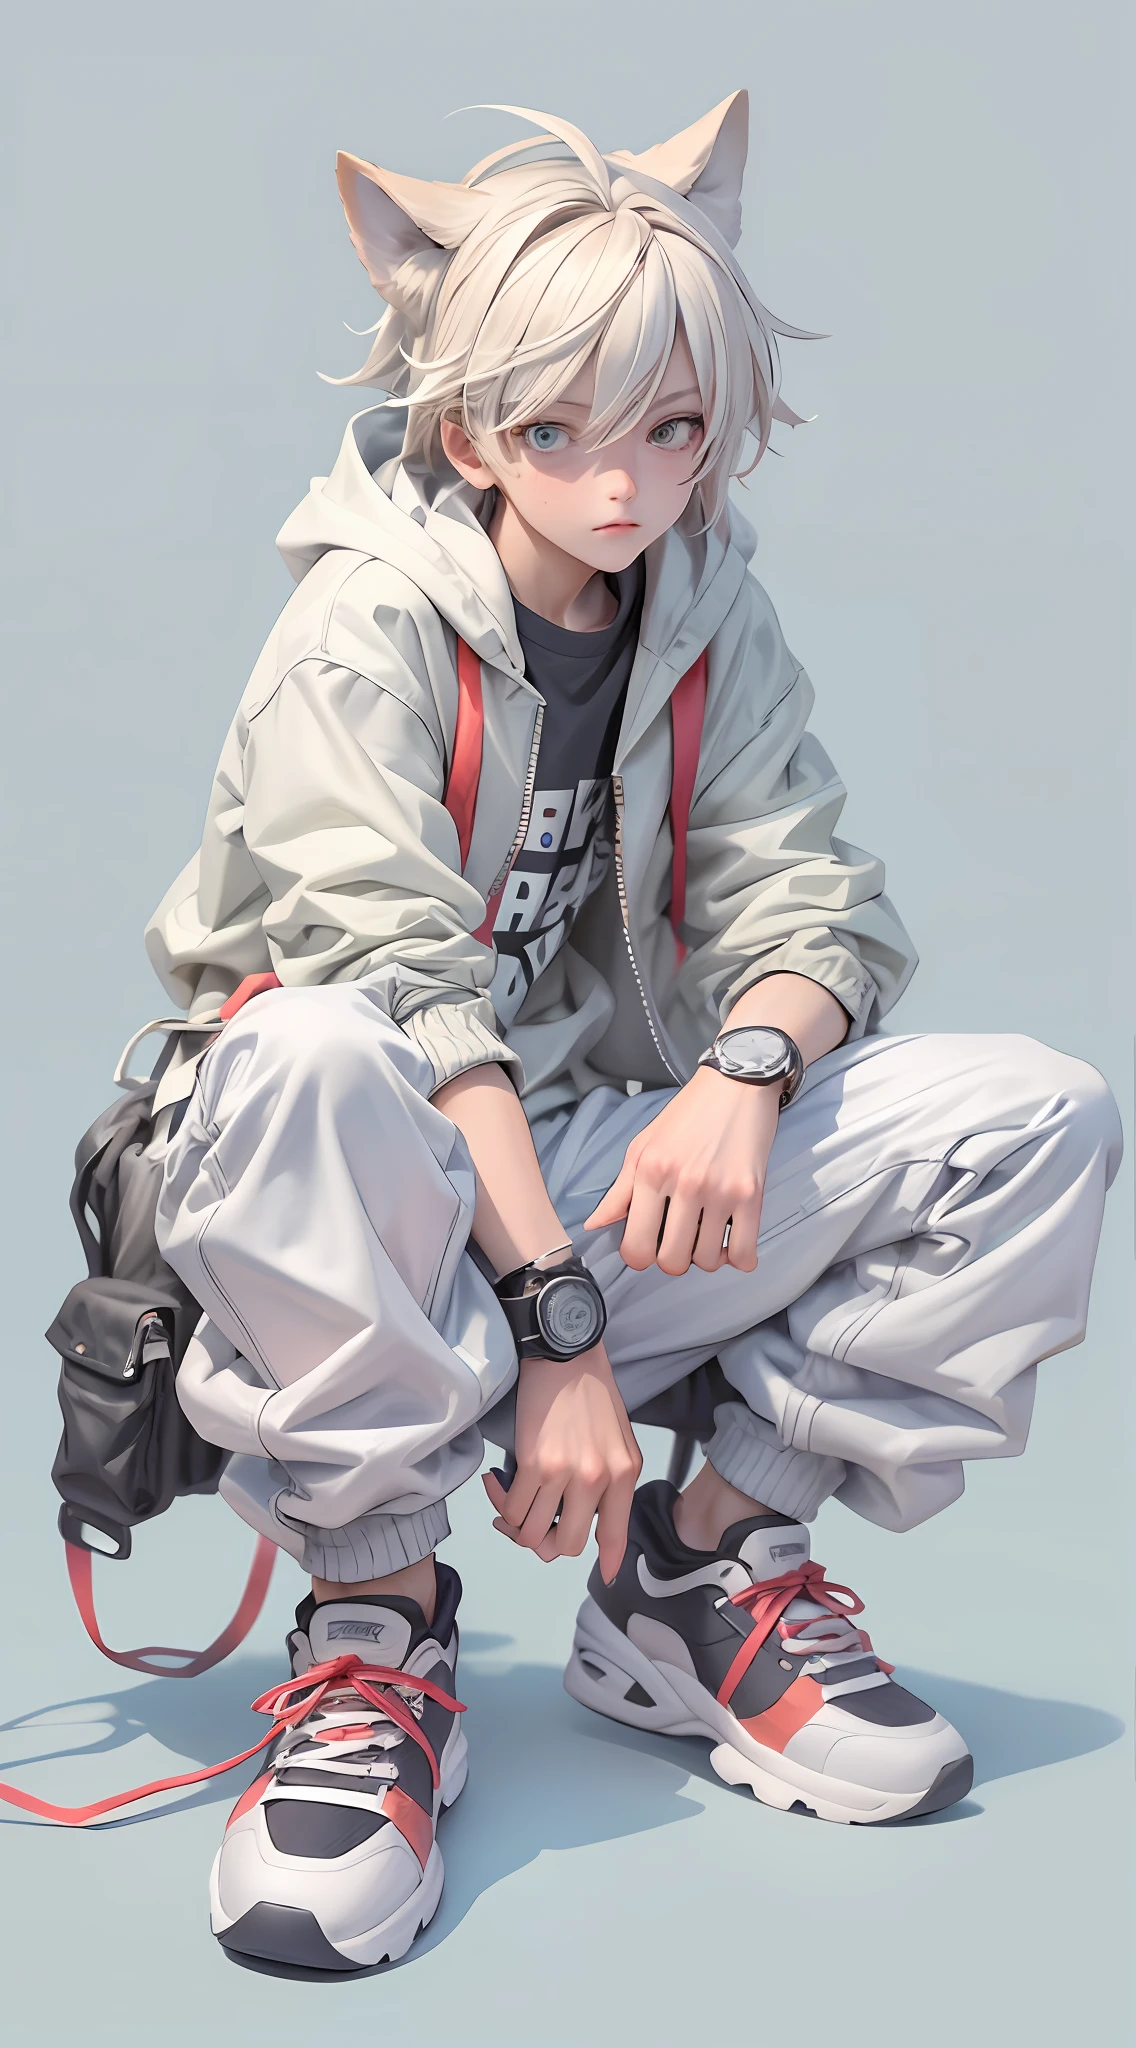 a masterpiece，Bestquality，offical art，8kwallpaper，Extremely Detailed，Illustration，1BOY，Trendy outfits，watch，sneaker shoes，squat down，Hands droop naturally，Hooded jacket，Street side，